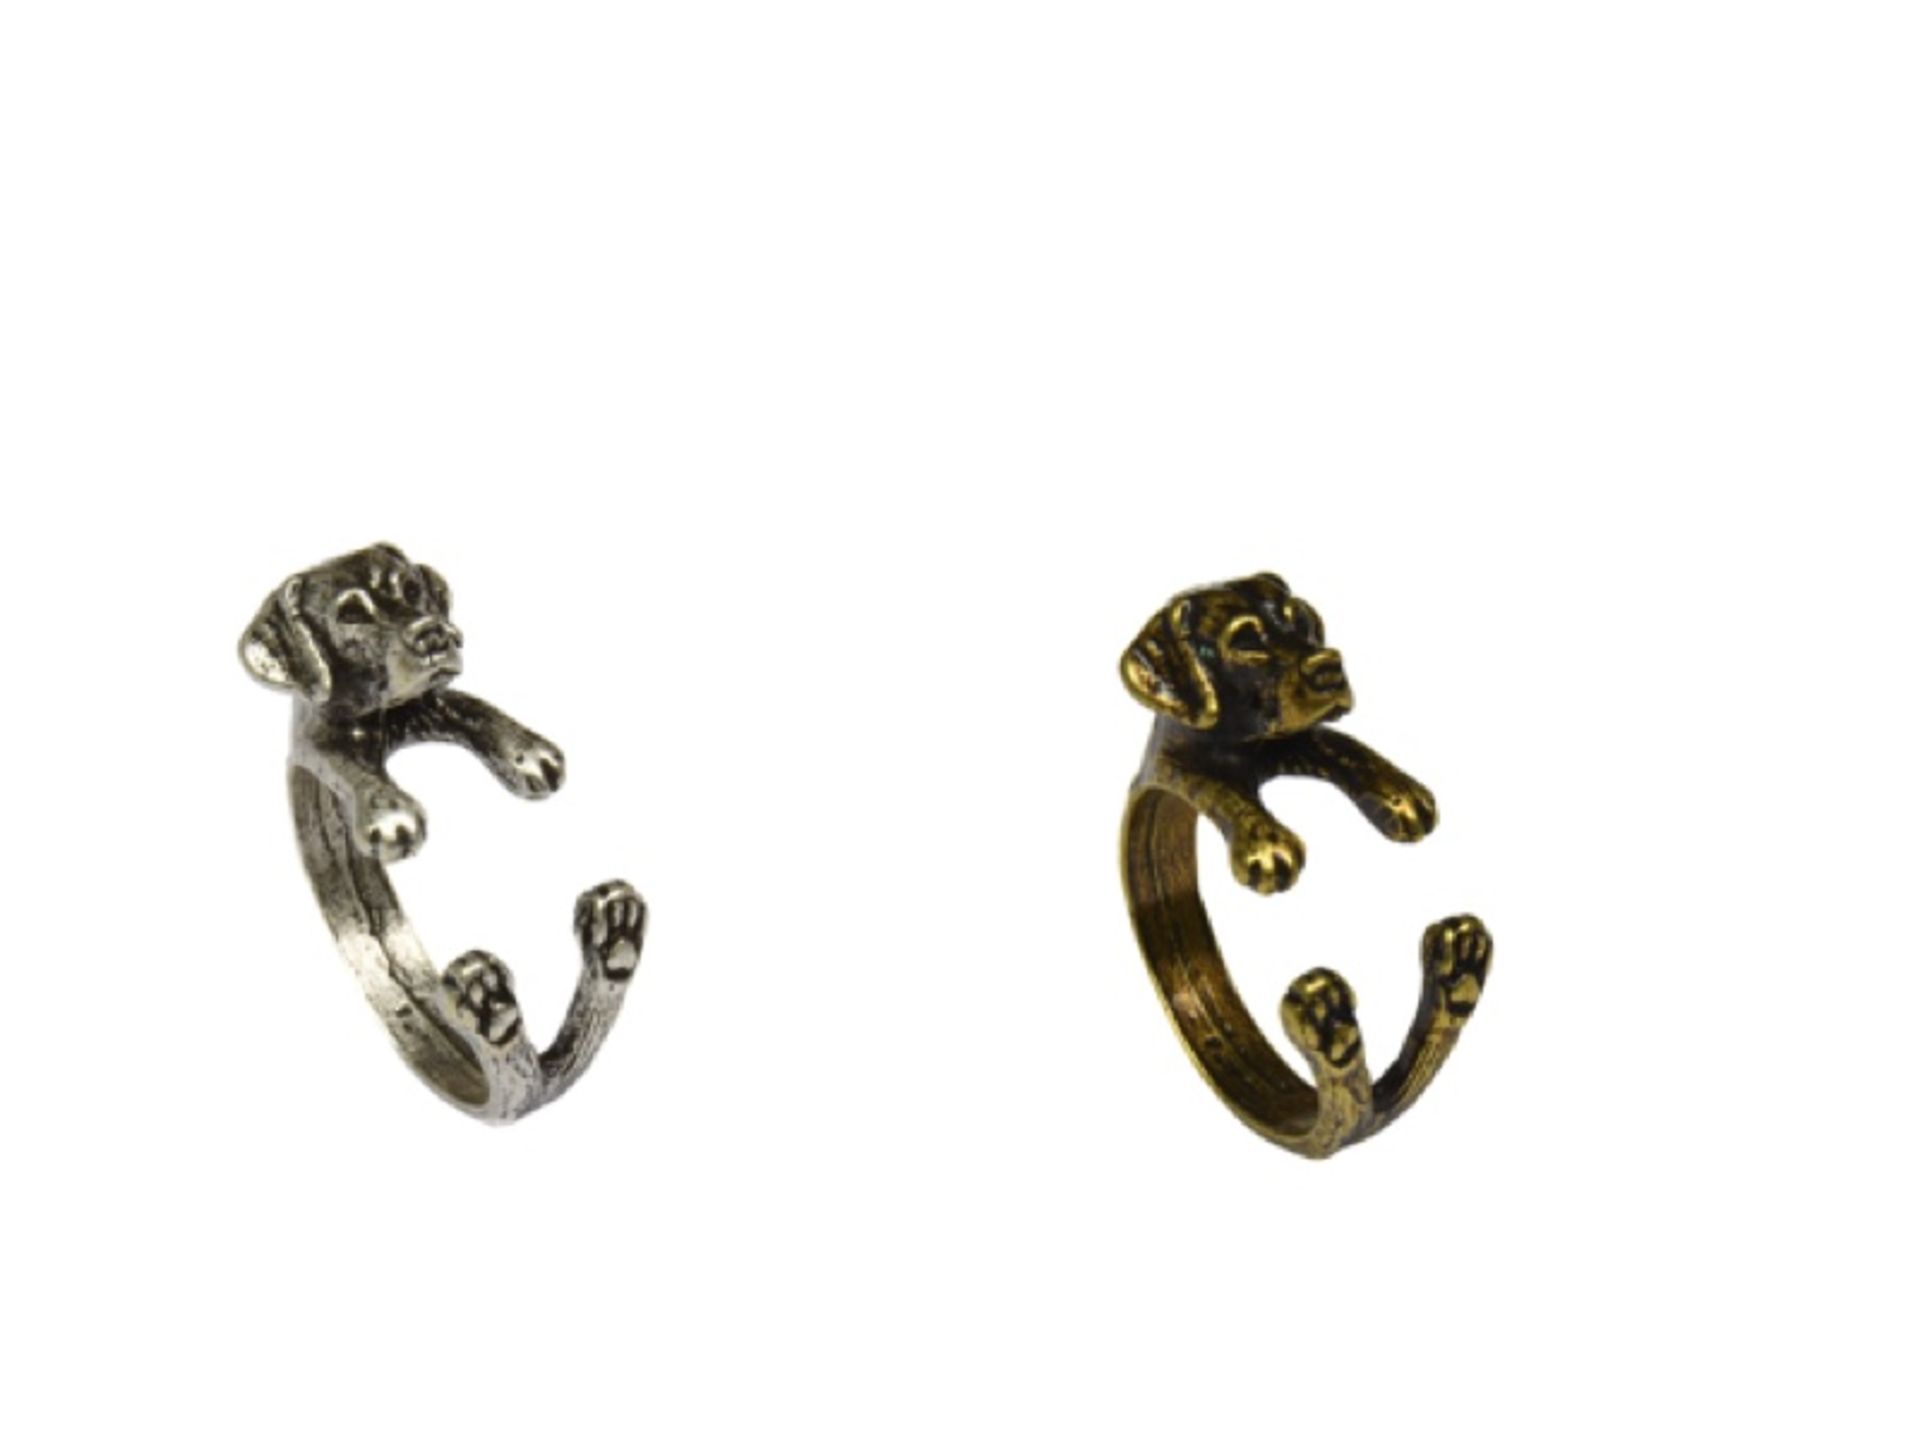 200+ Animal themed rings with velvet accessories bags - New - High Quality - Image 5 of 7